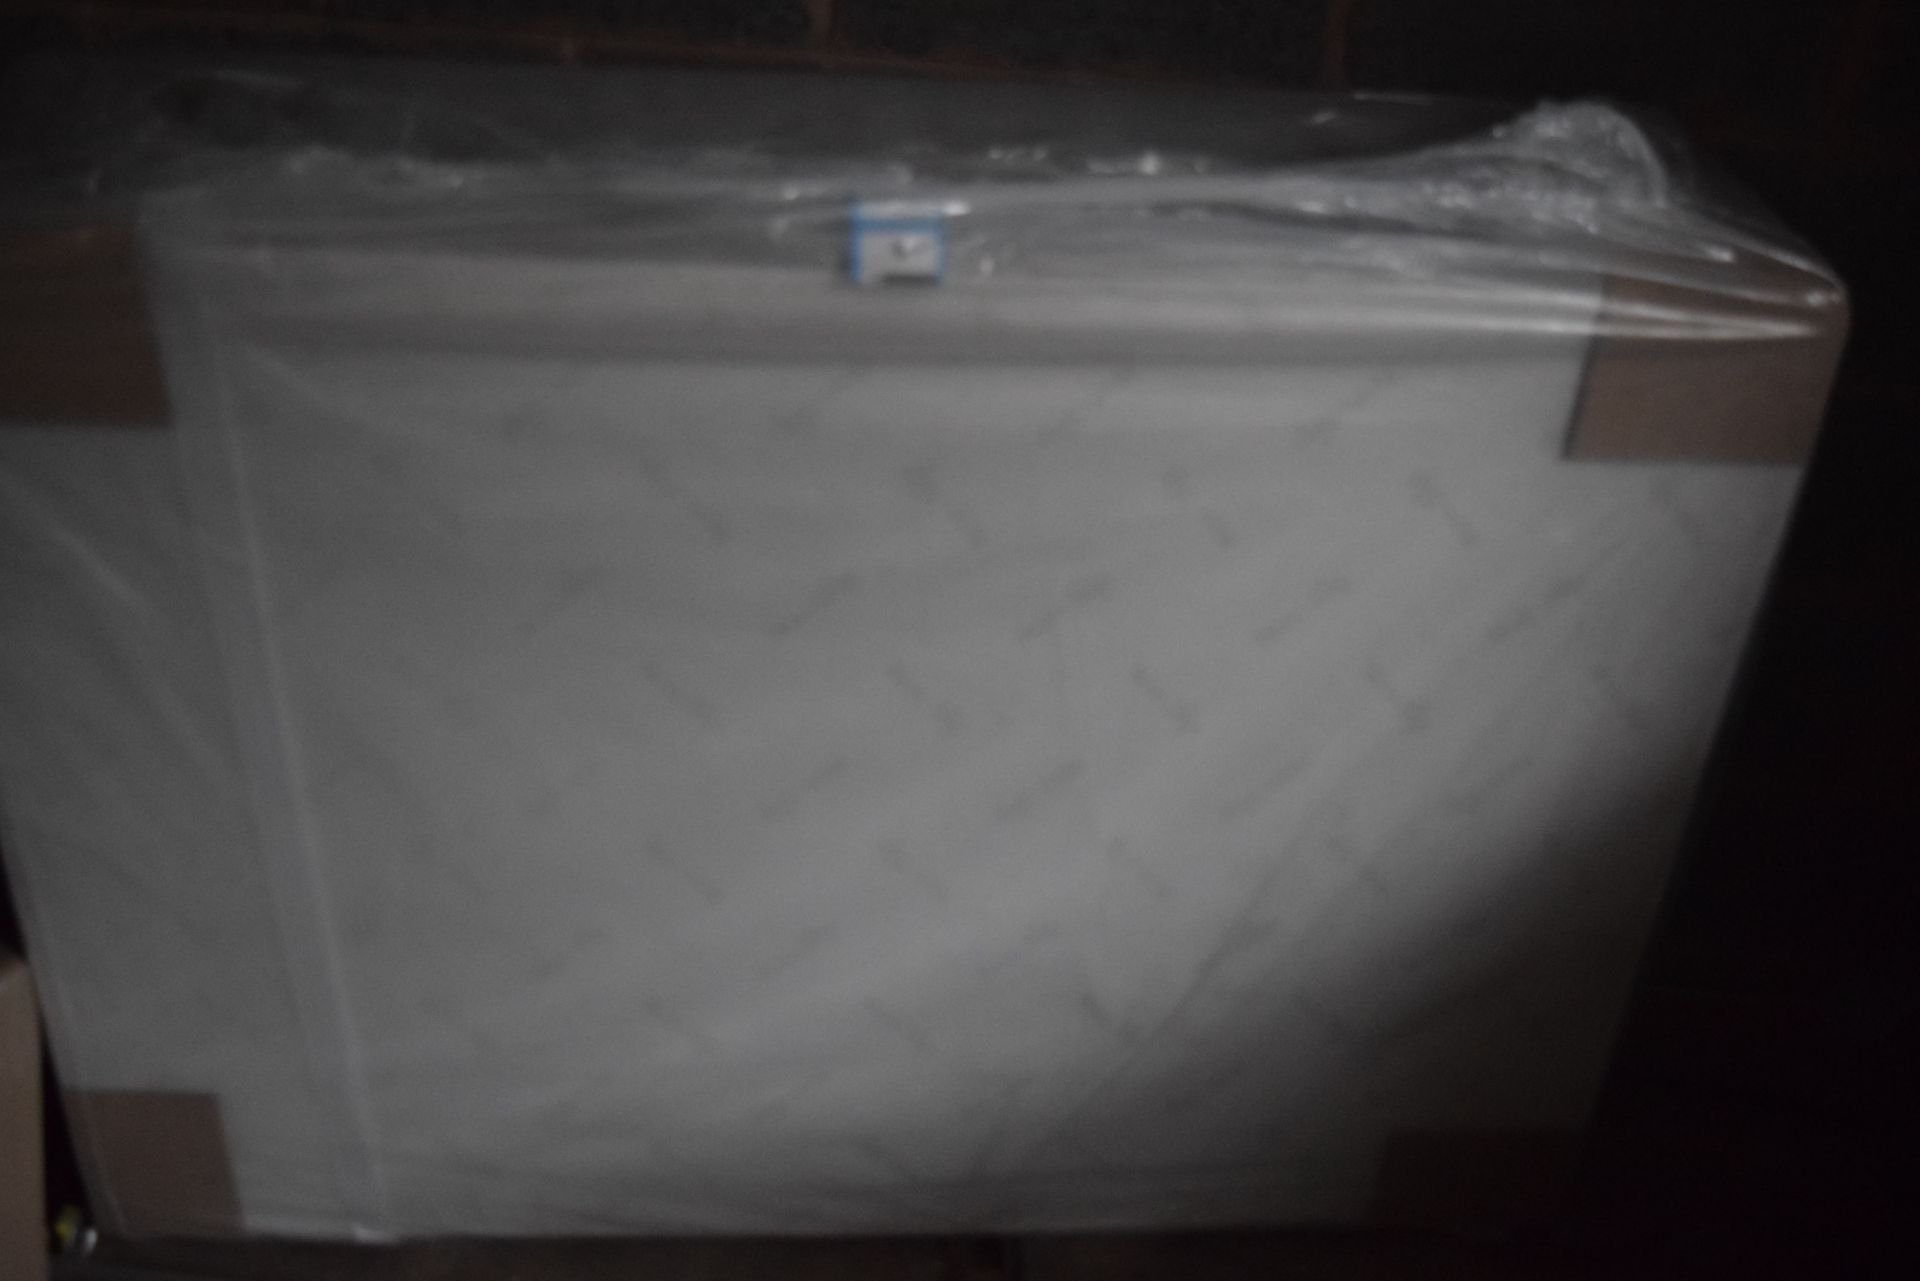 1 x ODD DIVAN BASE (PART LOT) 15/06/17 *PLEASE NOTE THAT THE BID PRICE IS MULTIPLIED BY THE NUMBER